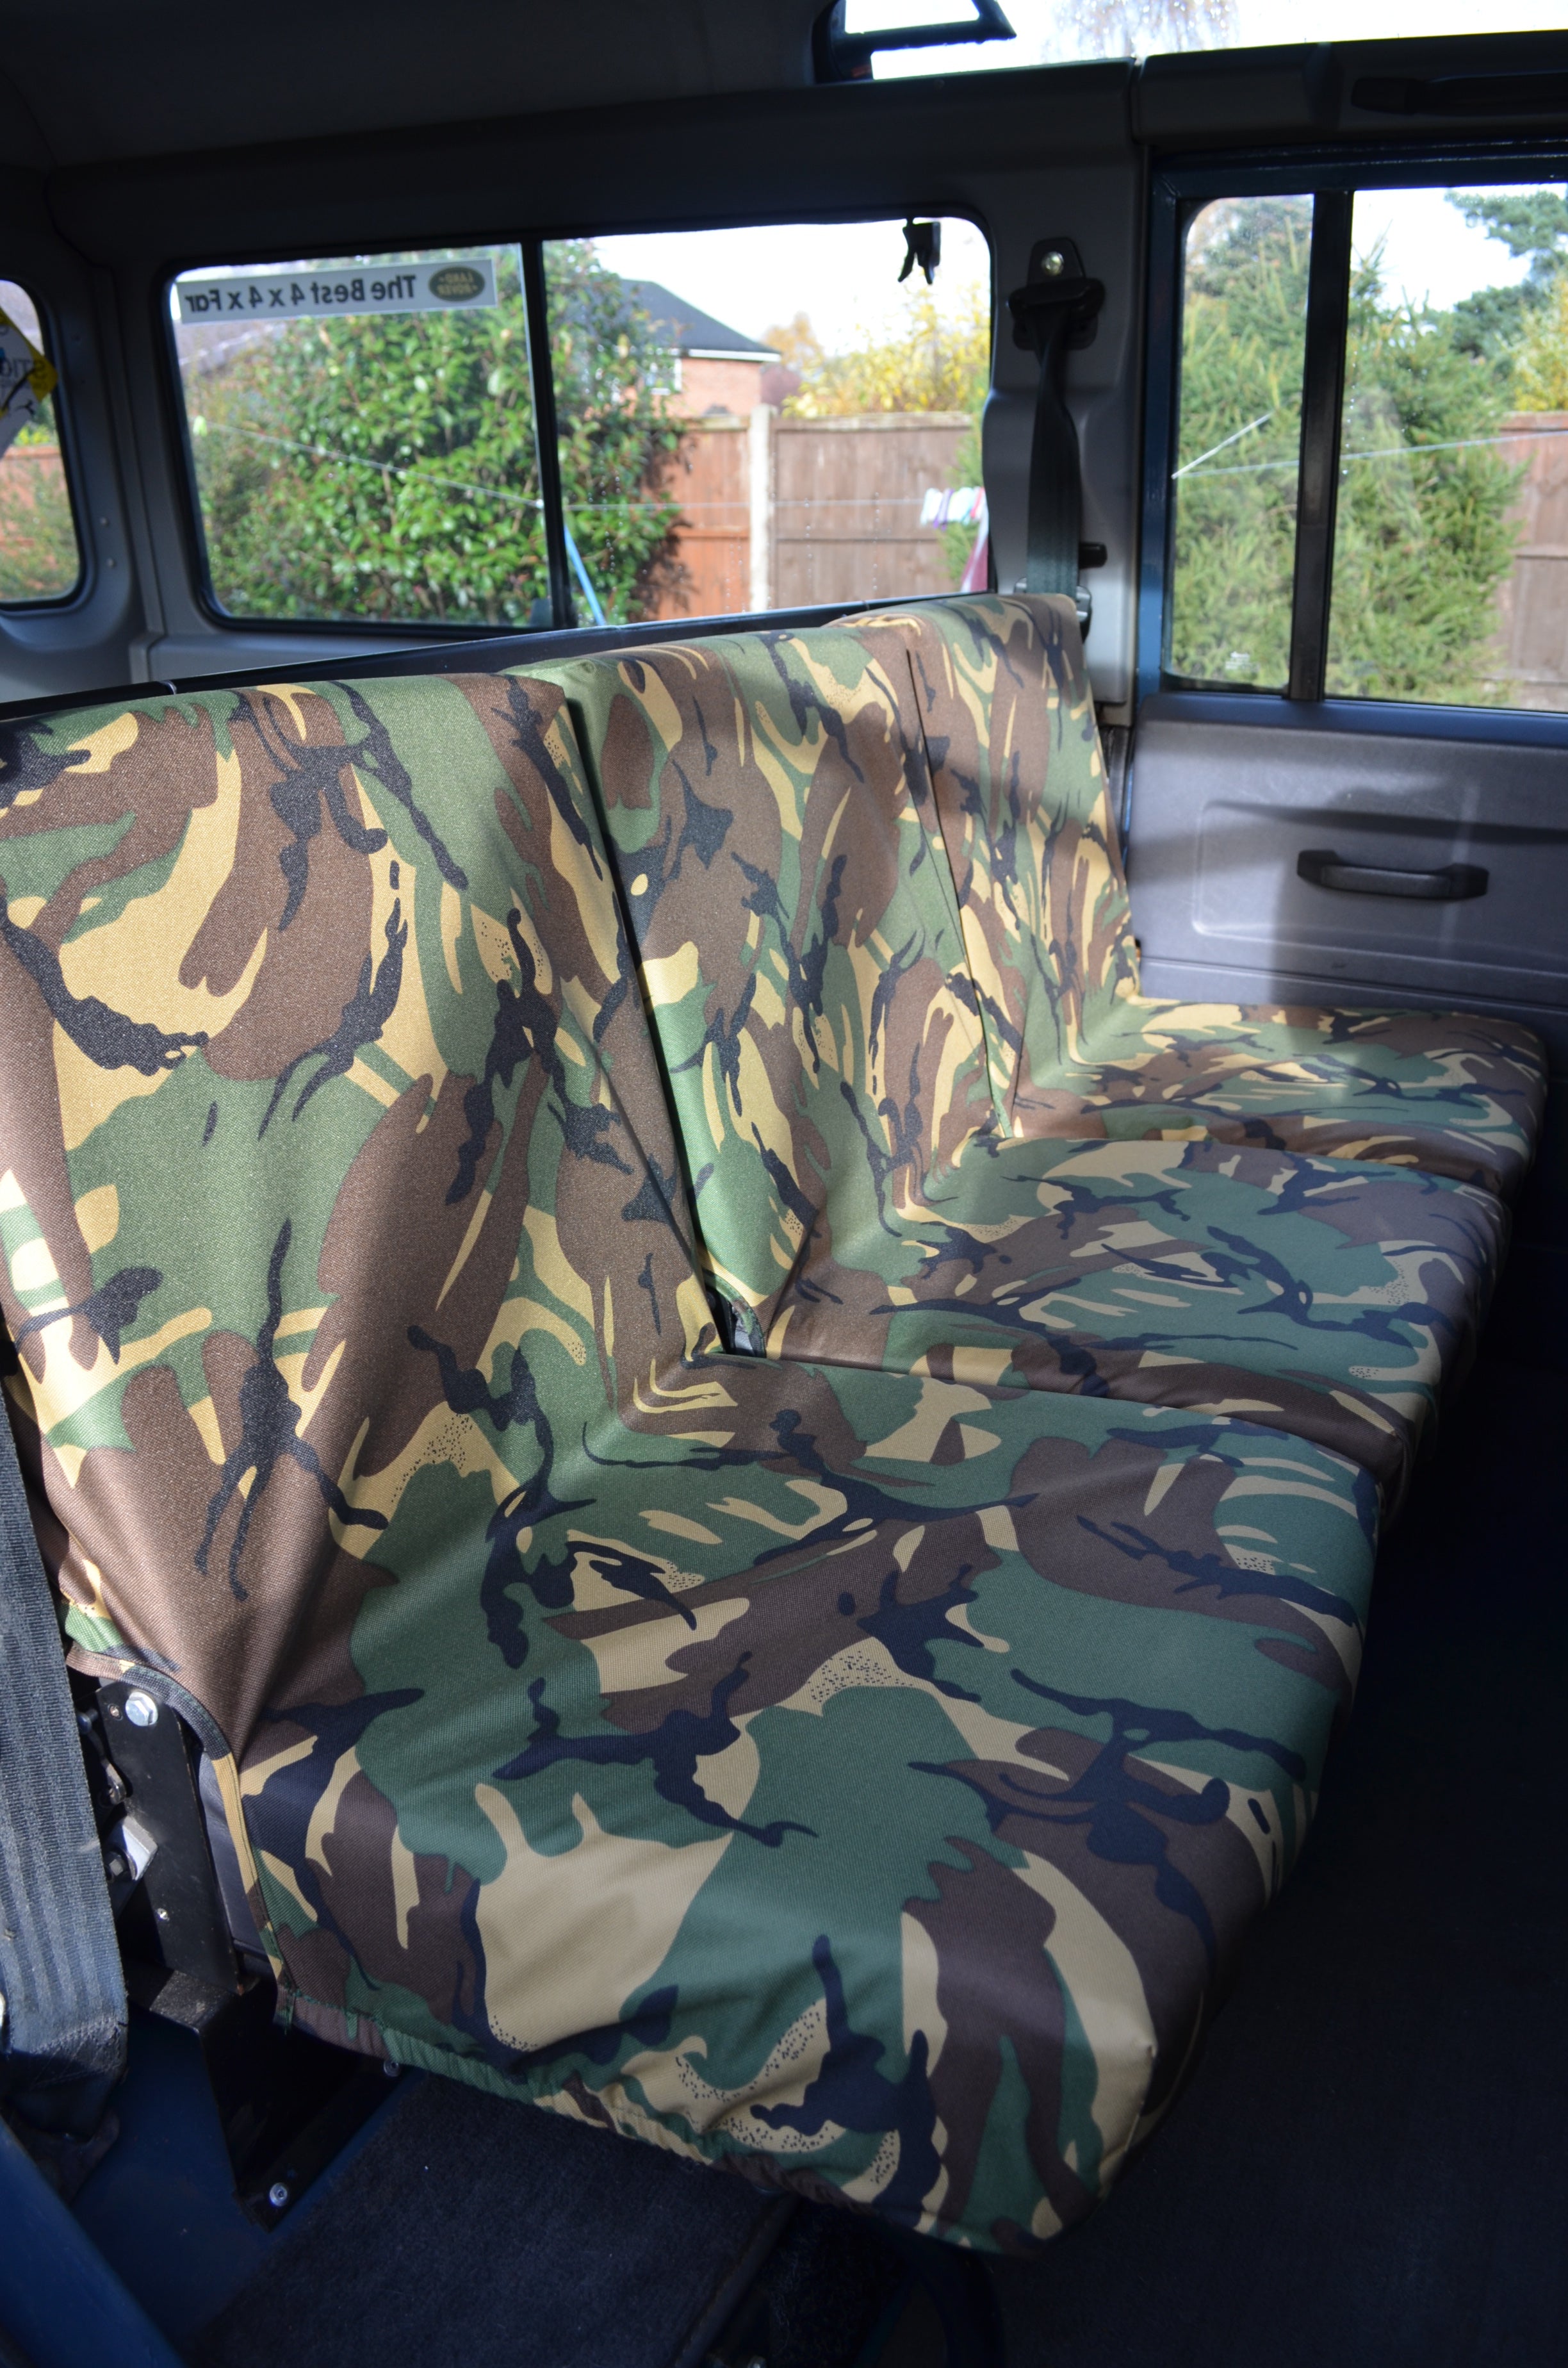 Land Rover Defender 1983 - 2007 Rear Seat Covers 2nd Row 3 Singles / Green Camouflage Turtle Covers Ltd